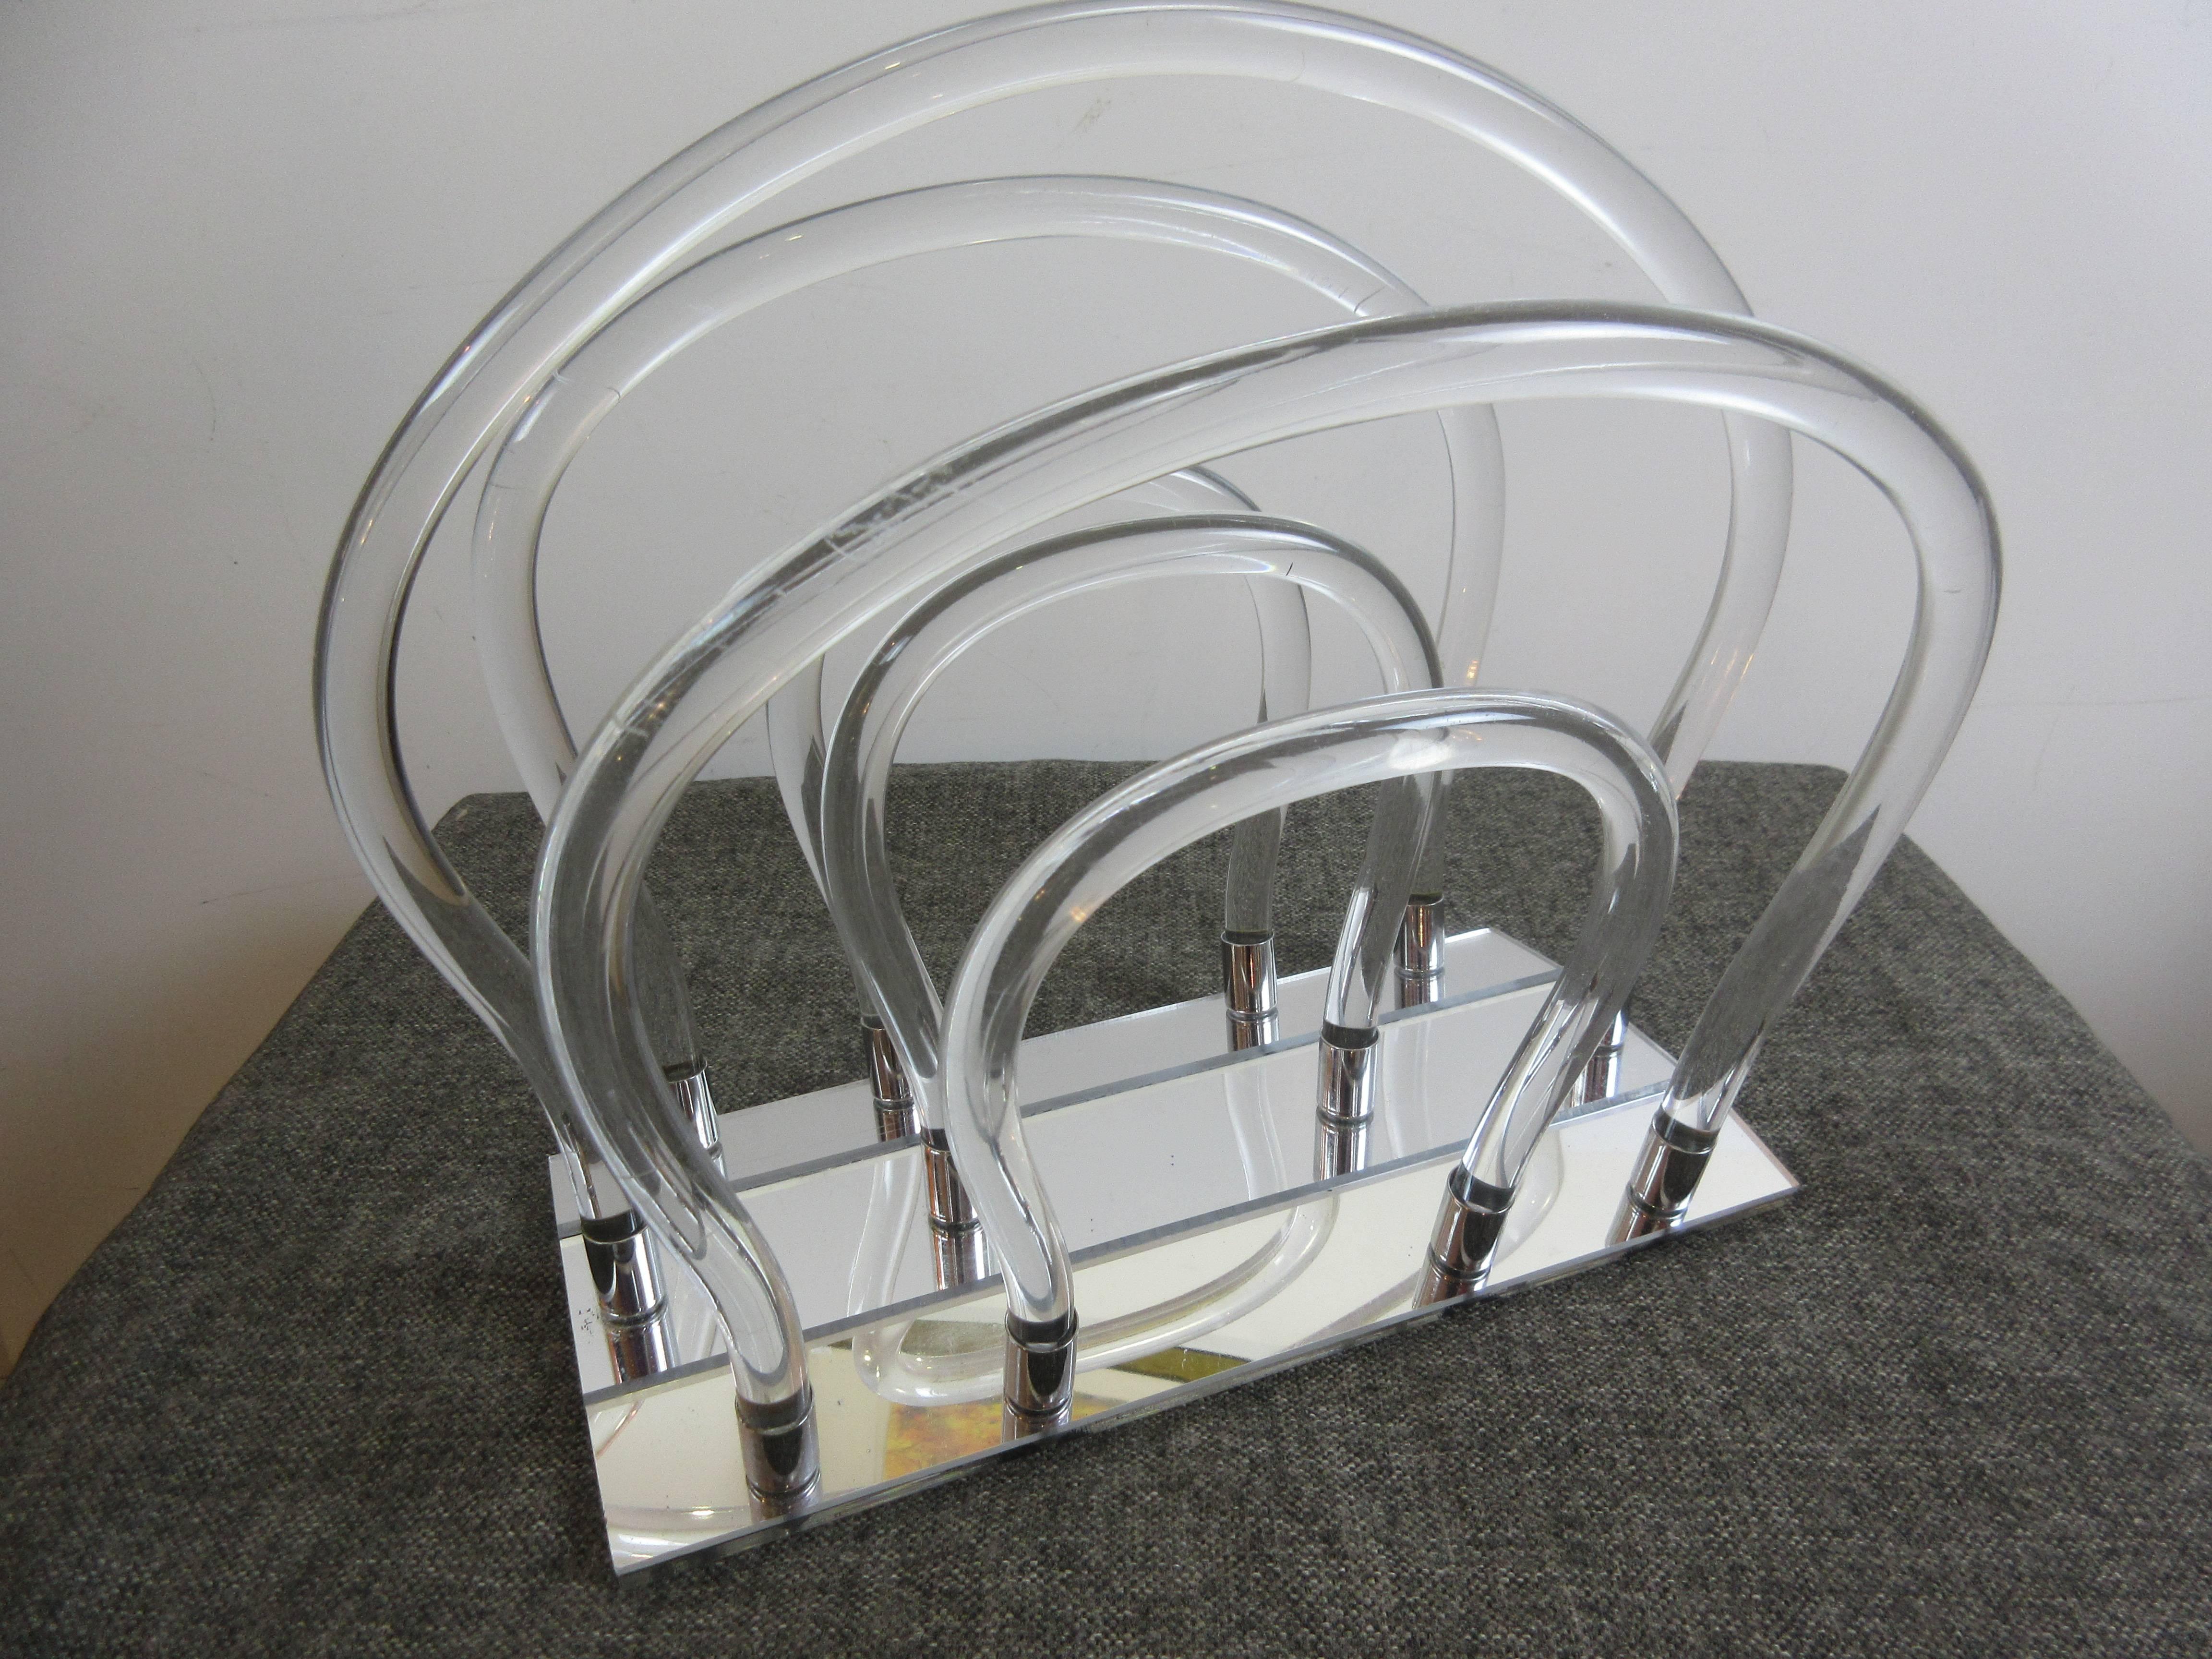 Classic 1970s Dorothy Thorpe magazine rack with mirrored bottom. Curvy round bands of Lucite that fit into round chrome holders that are mounted to the mirrored base.